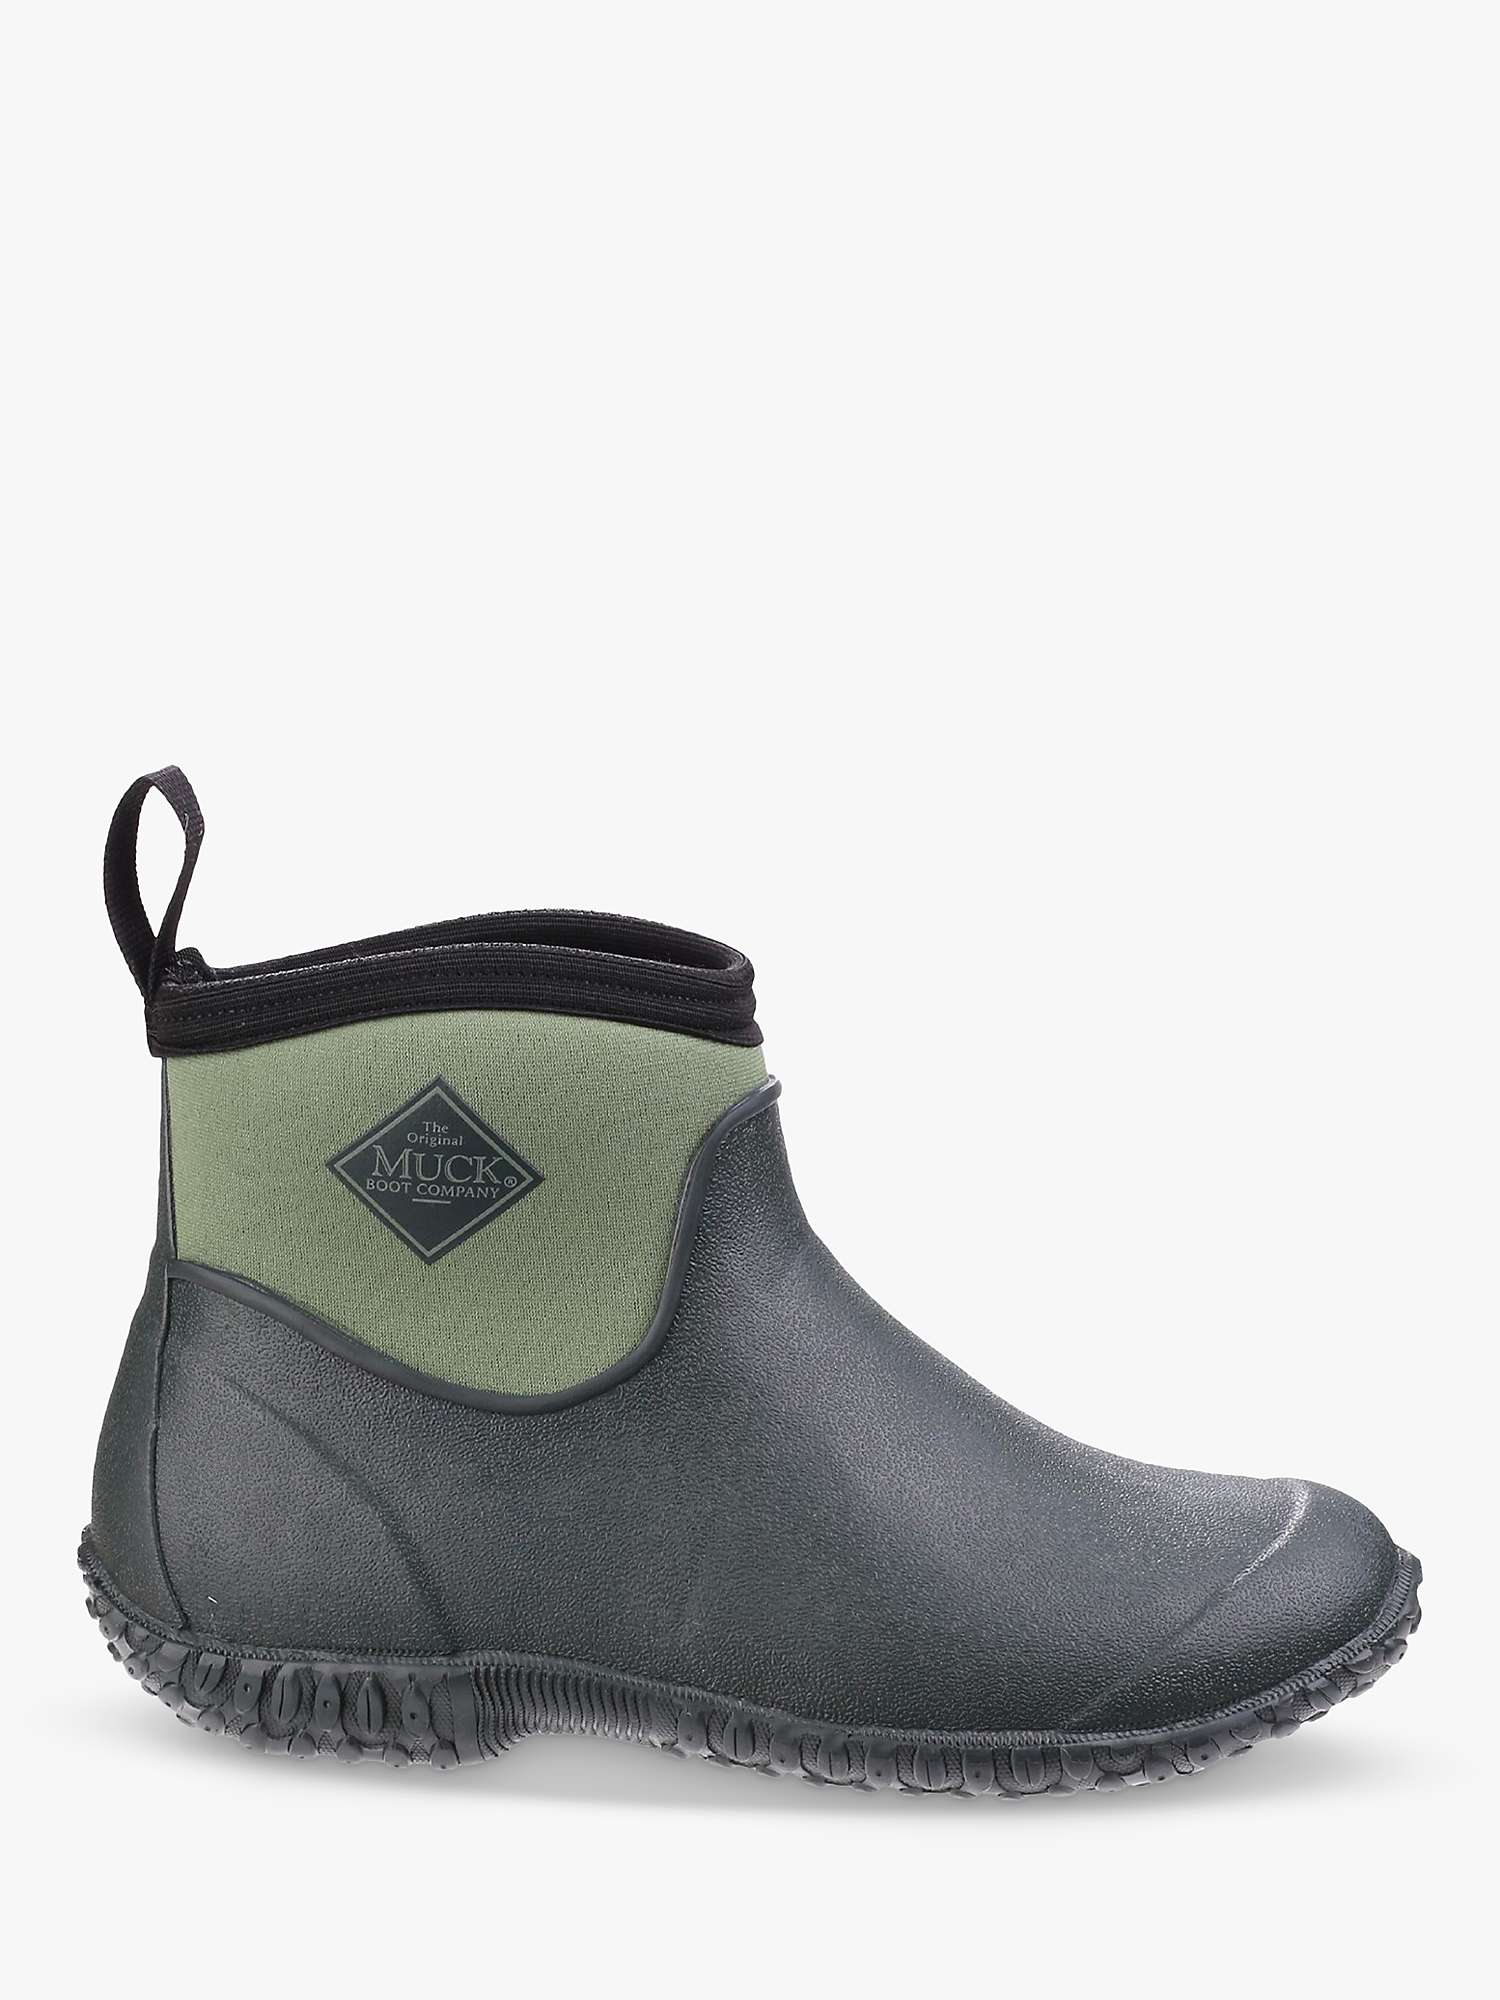 Buy Muck Muckster II Ankle Wellington Boots, Green Online at johnlewis.com